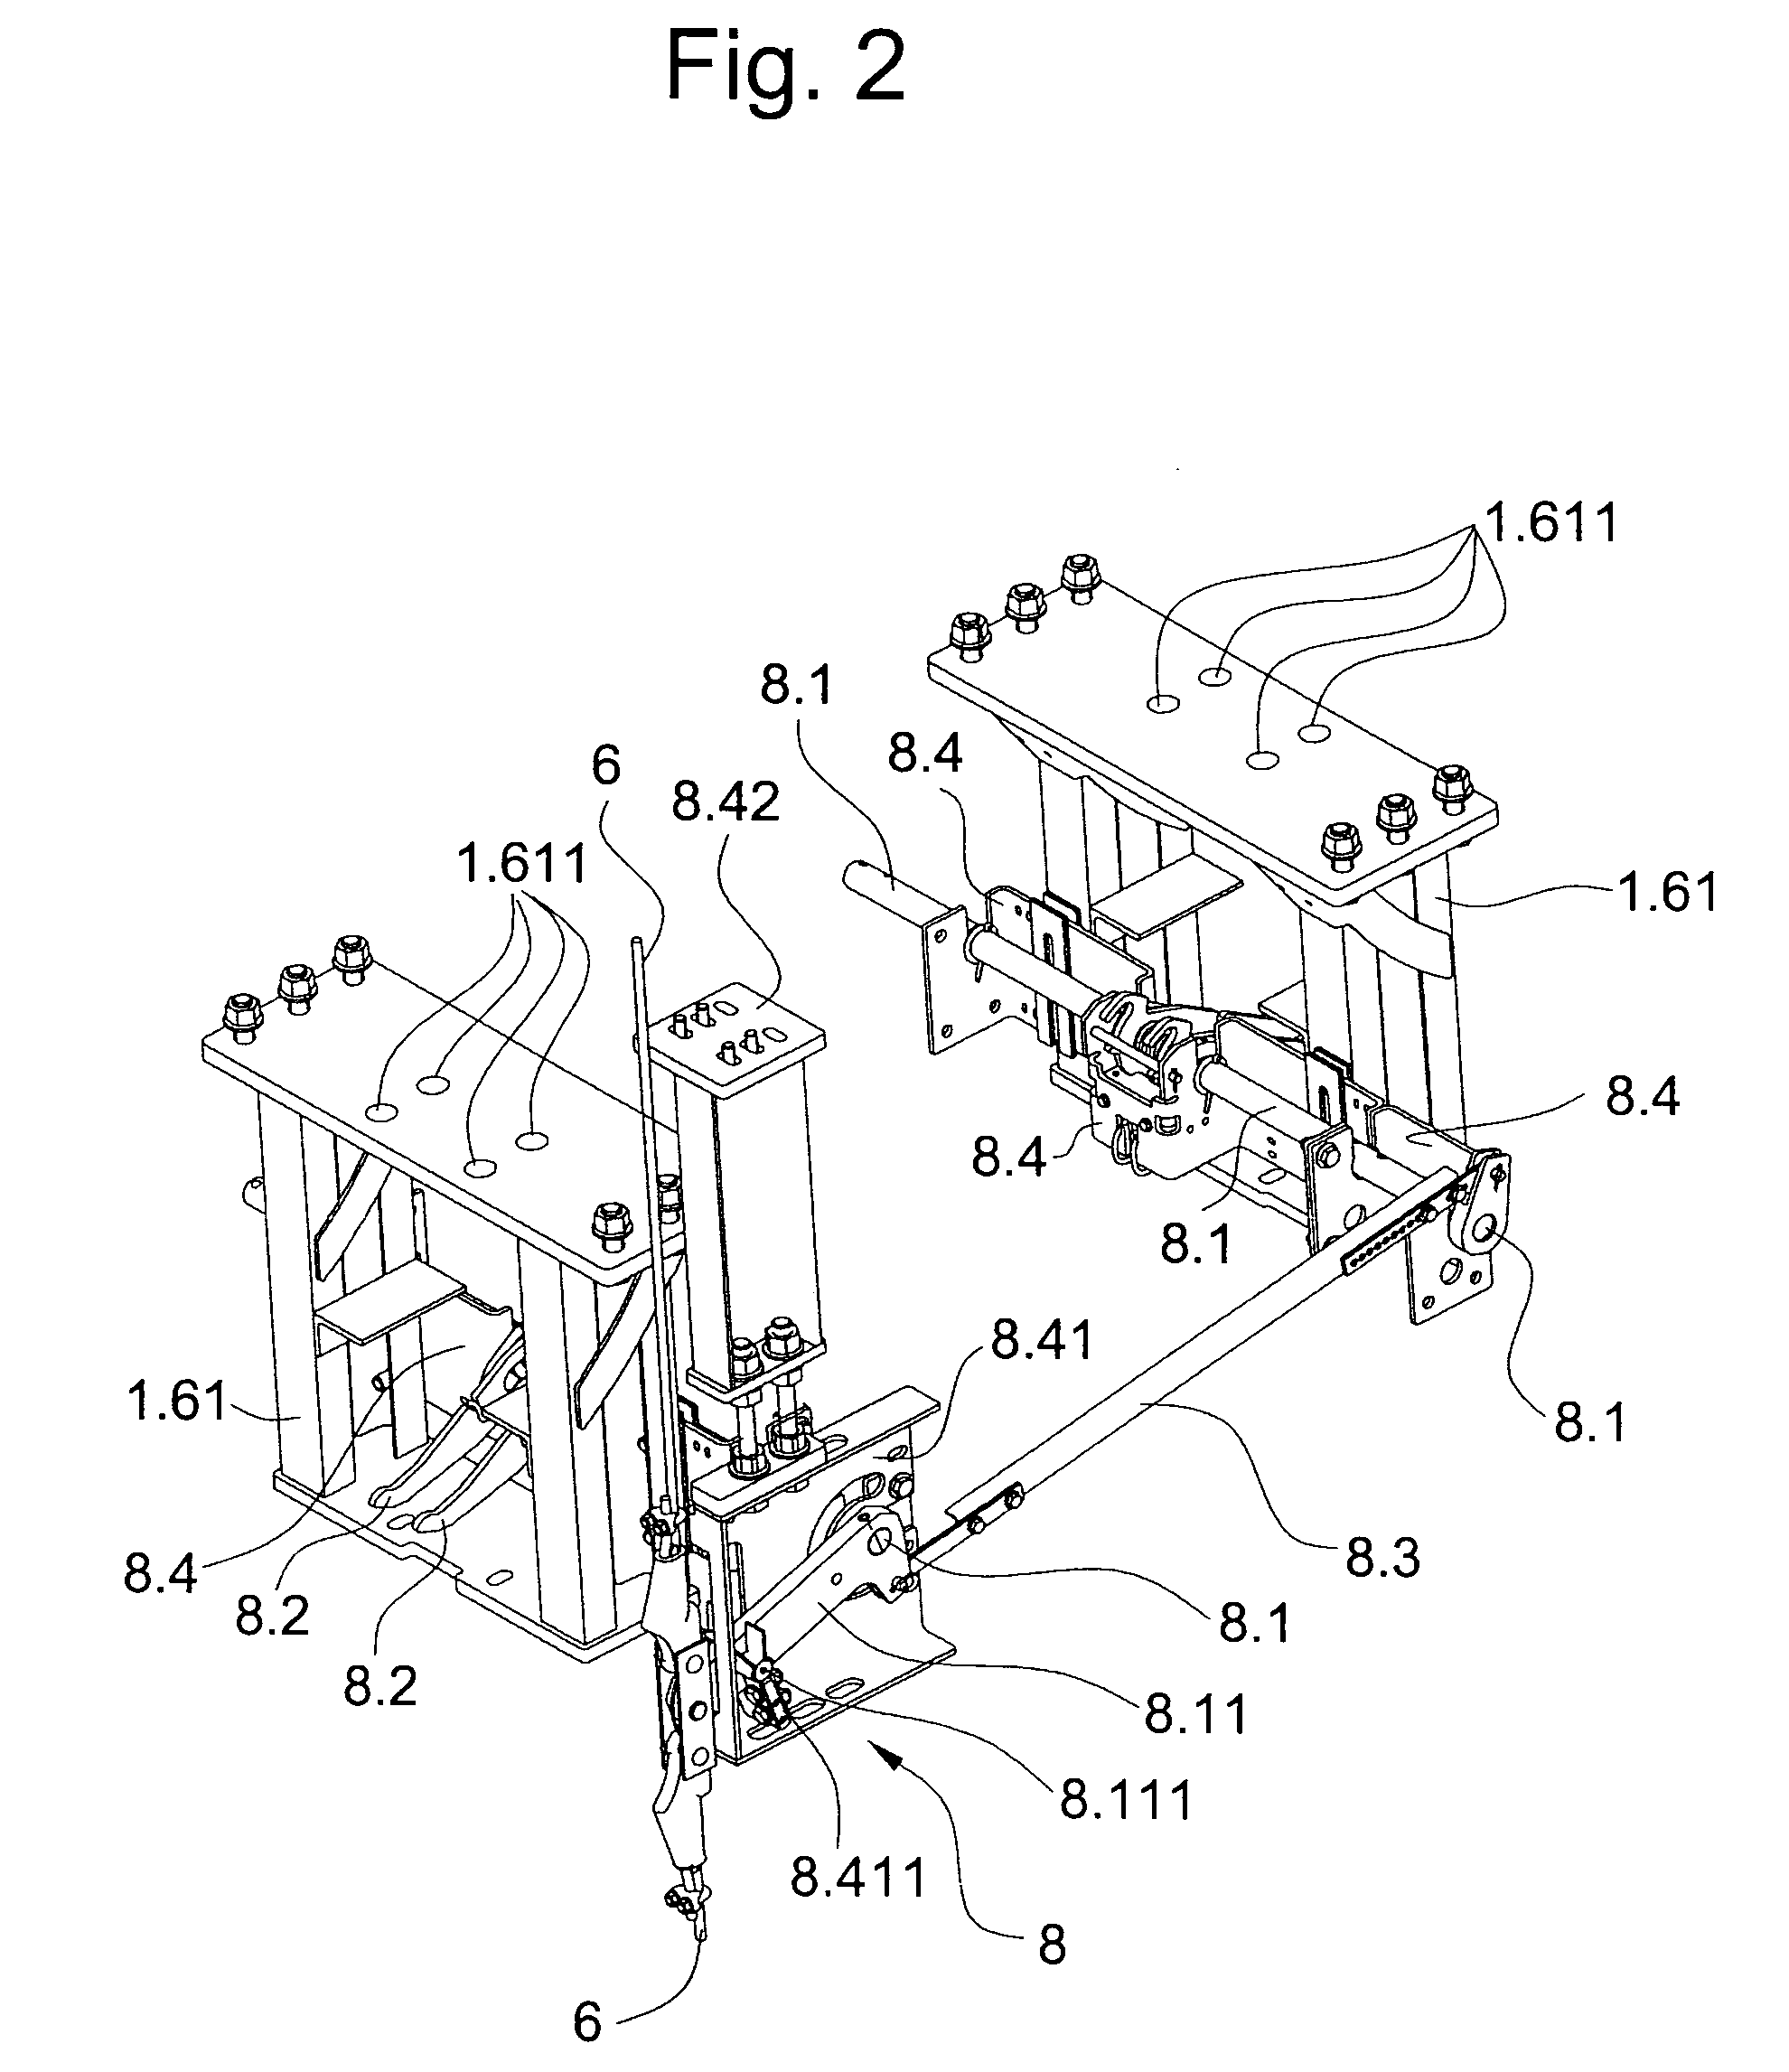 Equipment for engaging a safety braking device for a lift cage